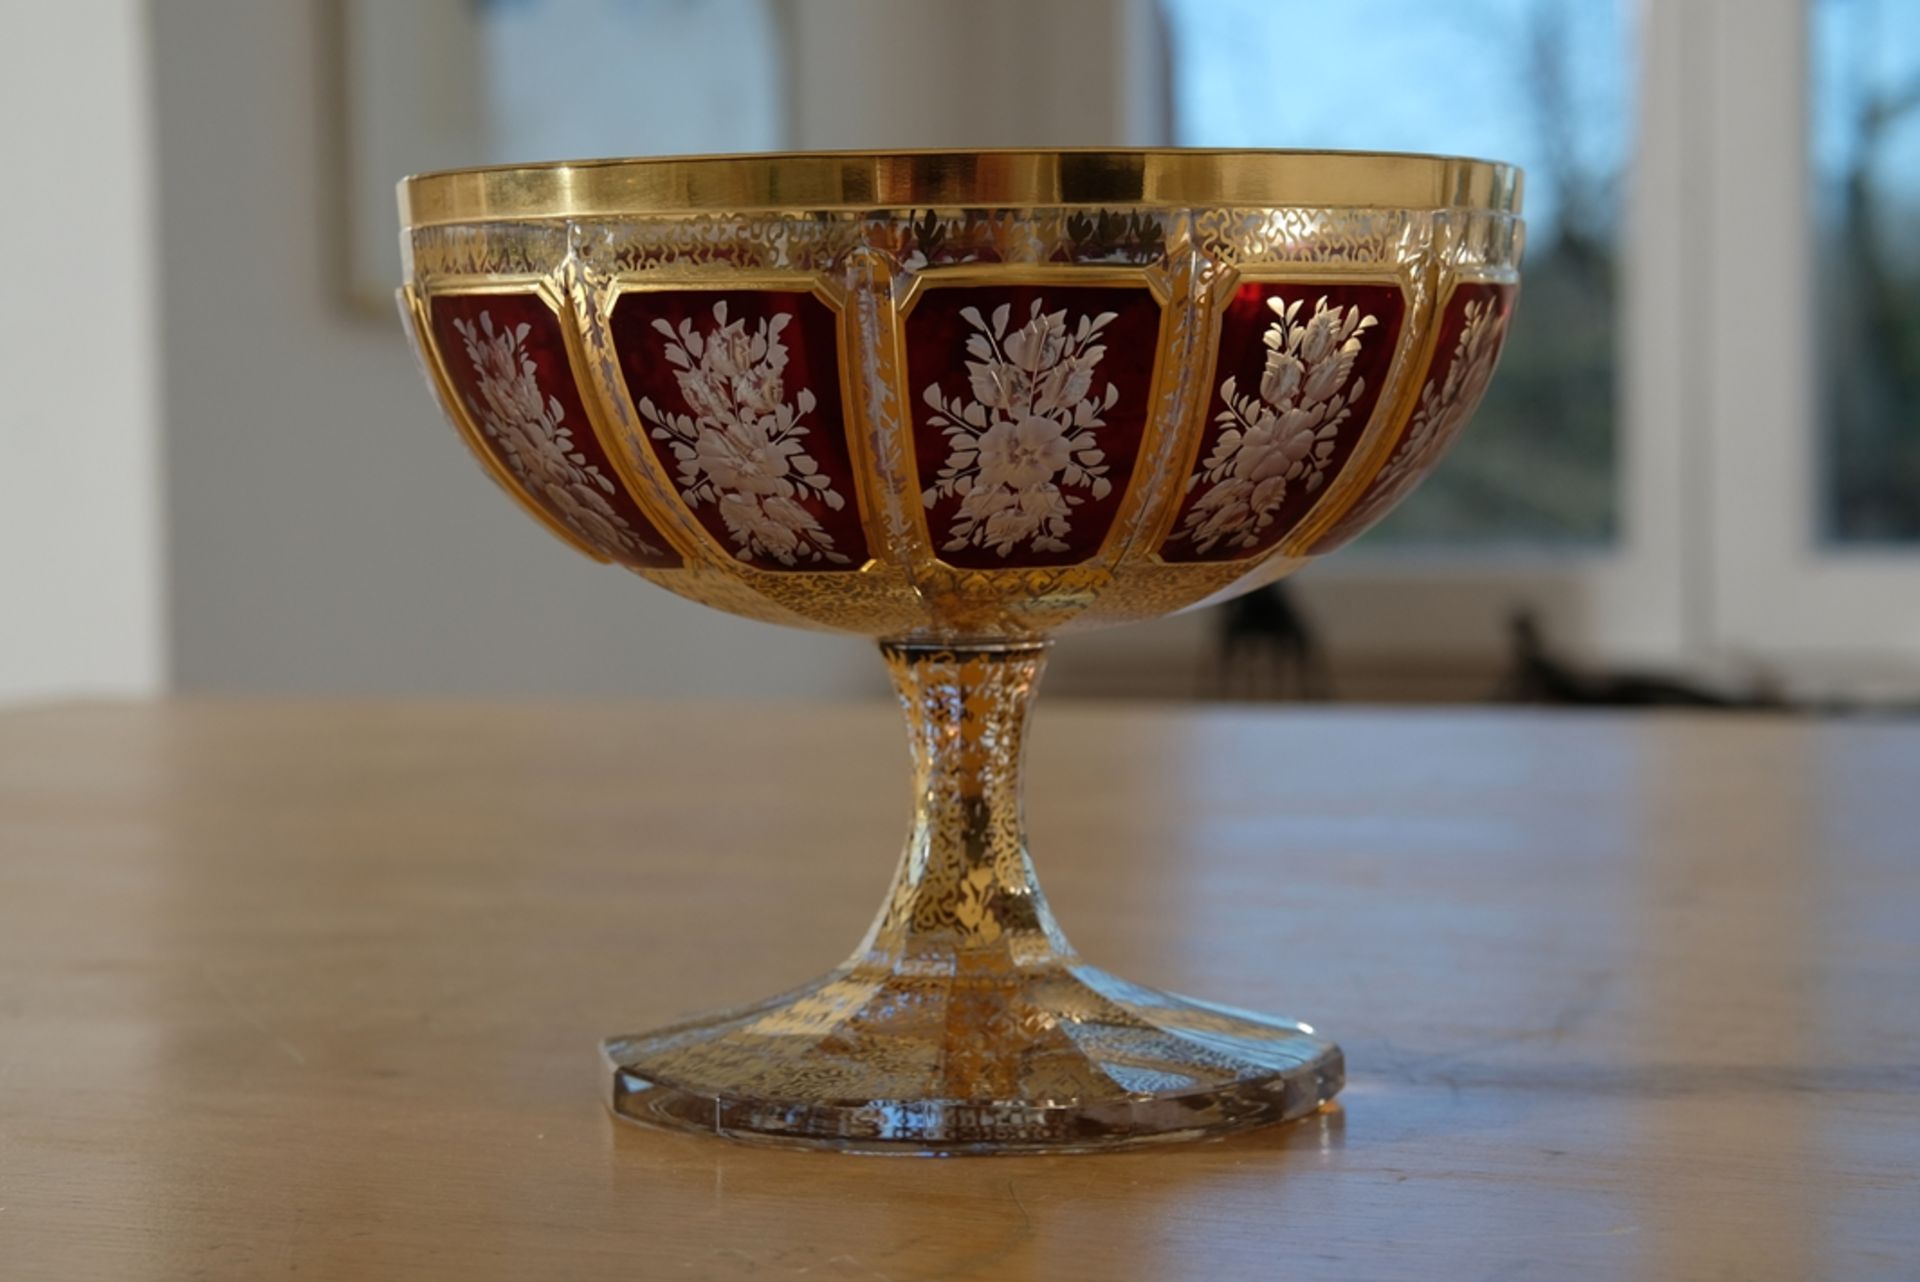 Foot bowl, probably Josephinenhütte, matt cut decoration, floral decoration, set in red and gold. T